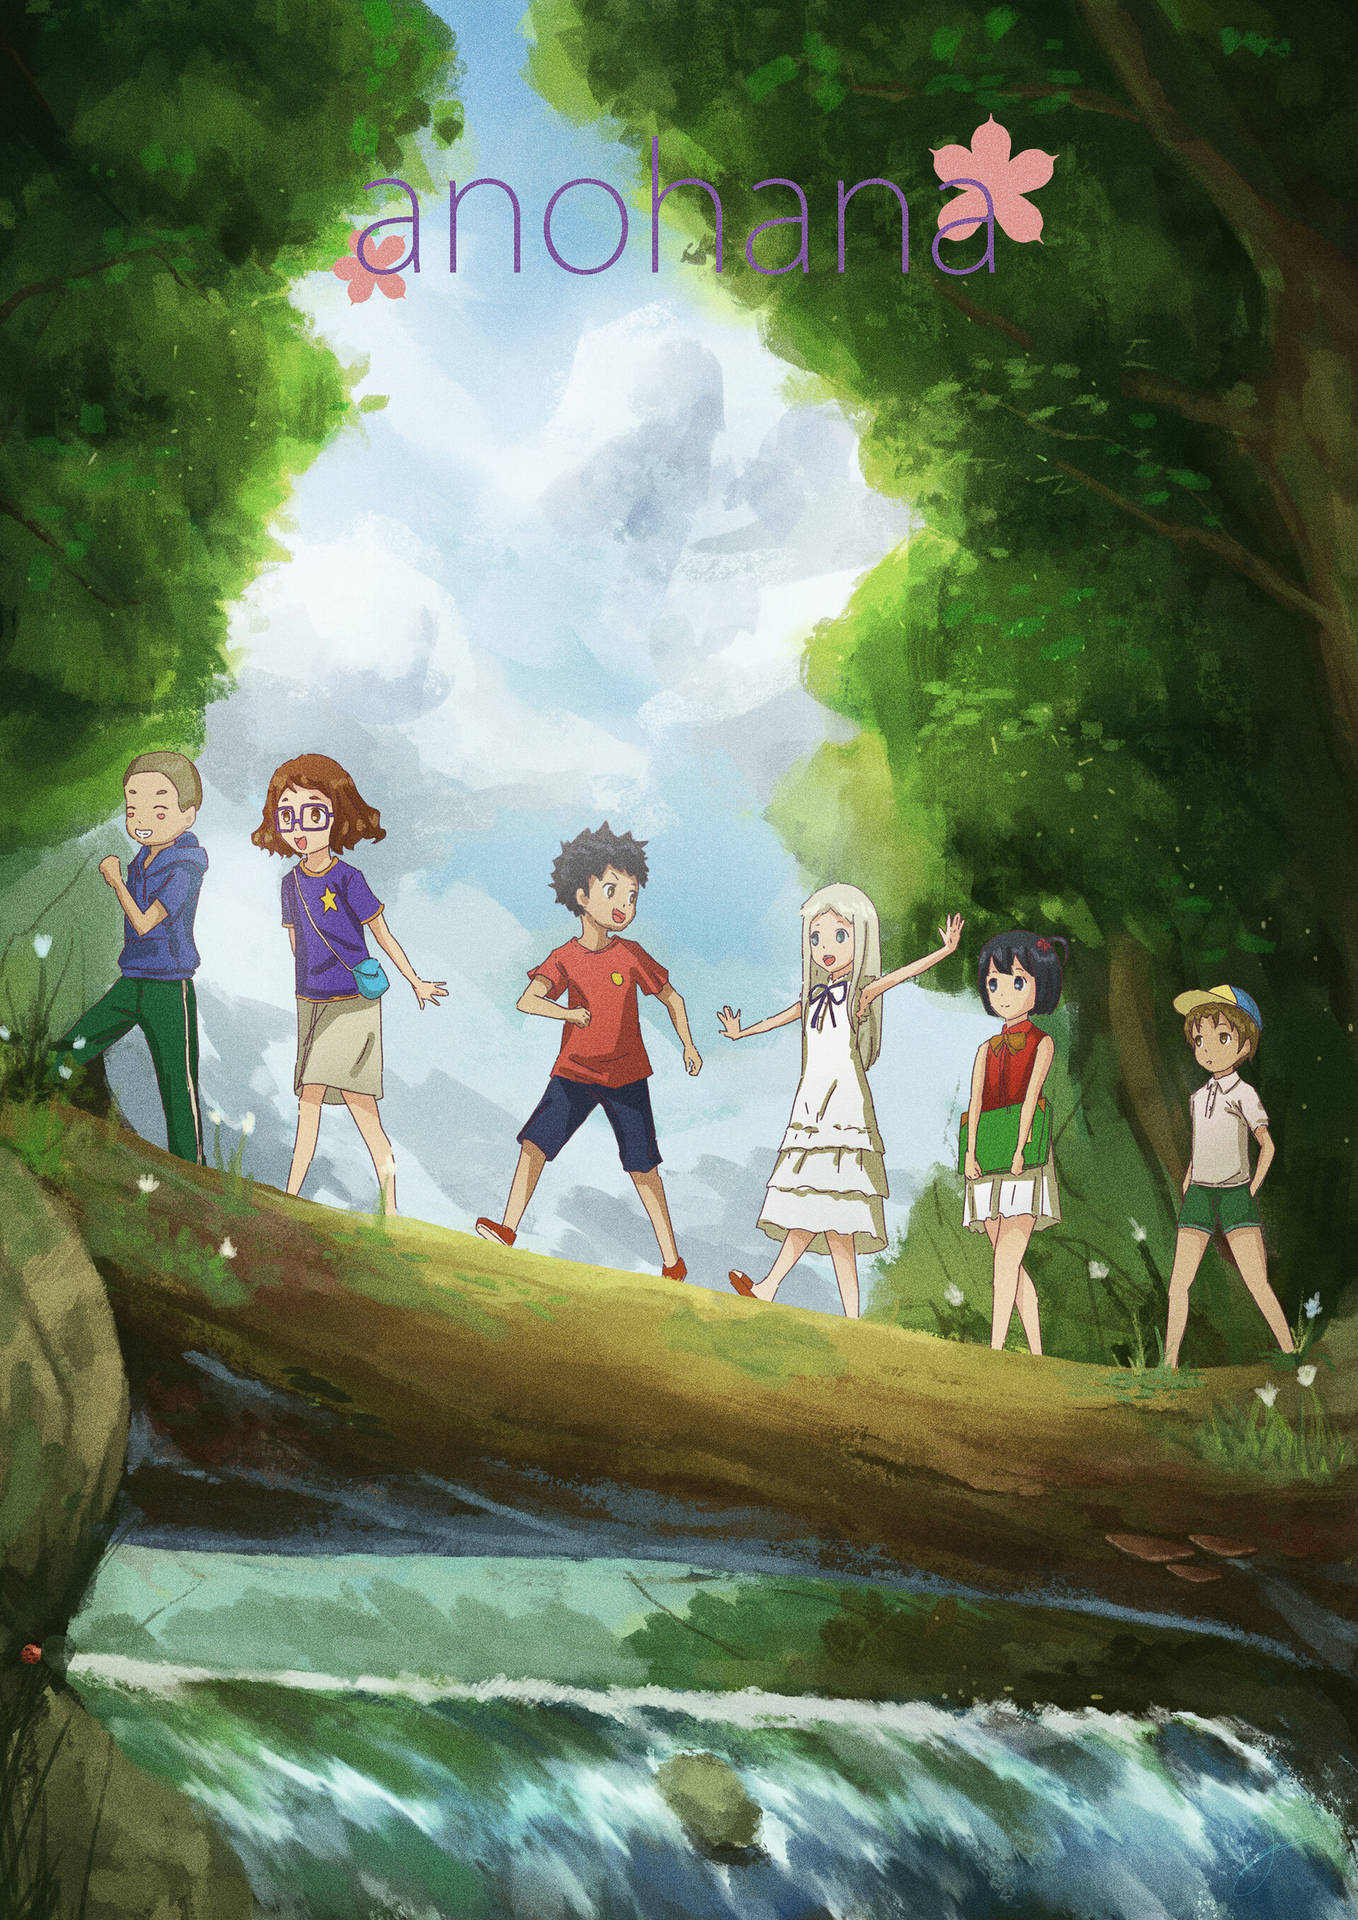 Anohana Characters: A Moment Of Friendship